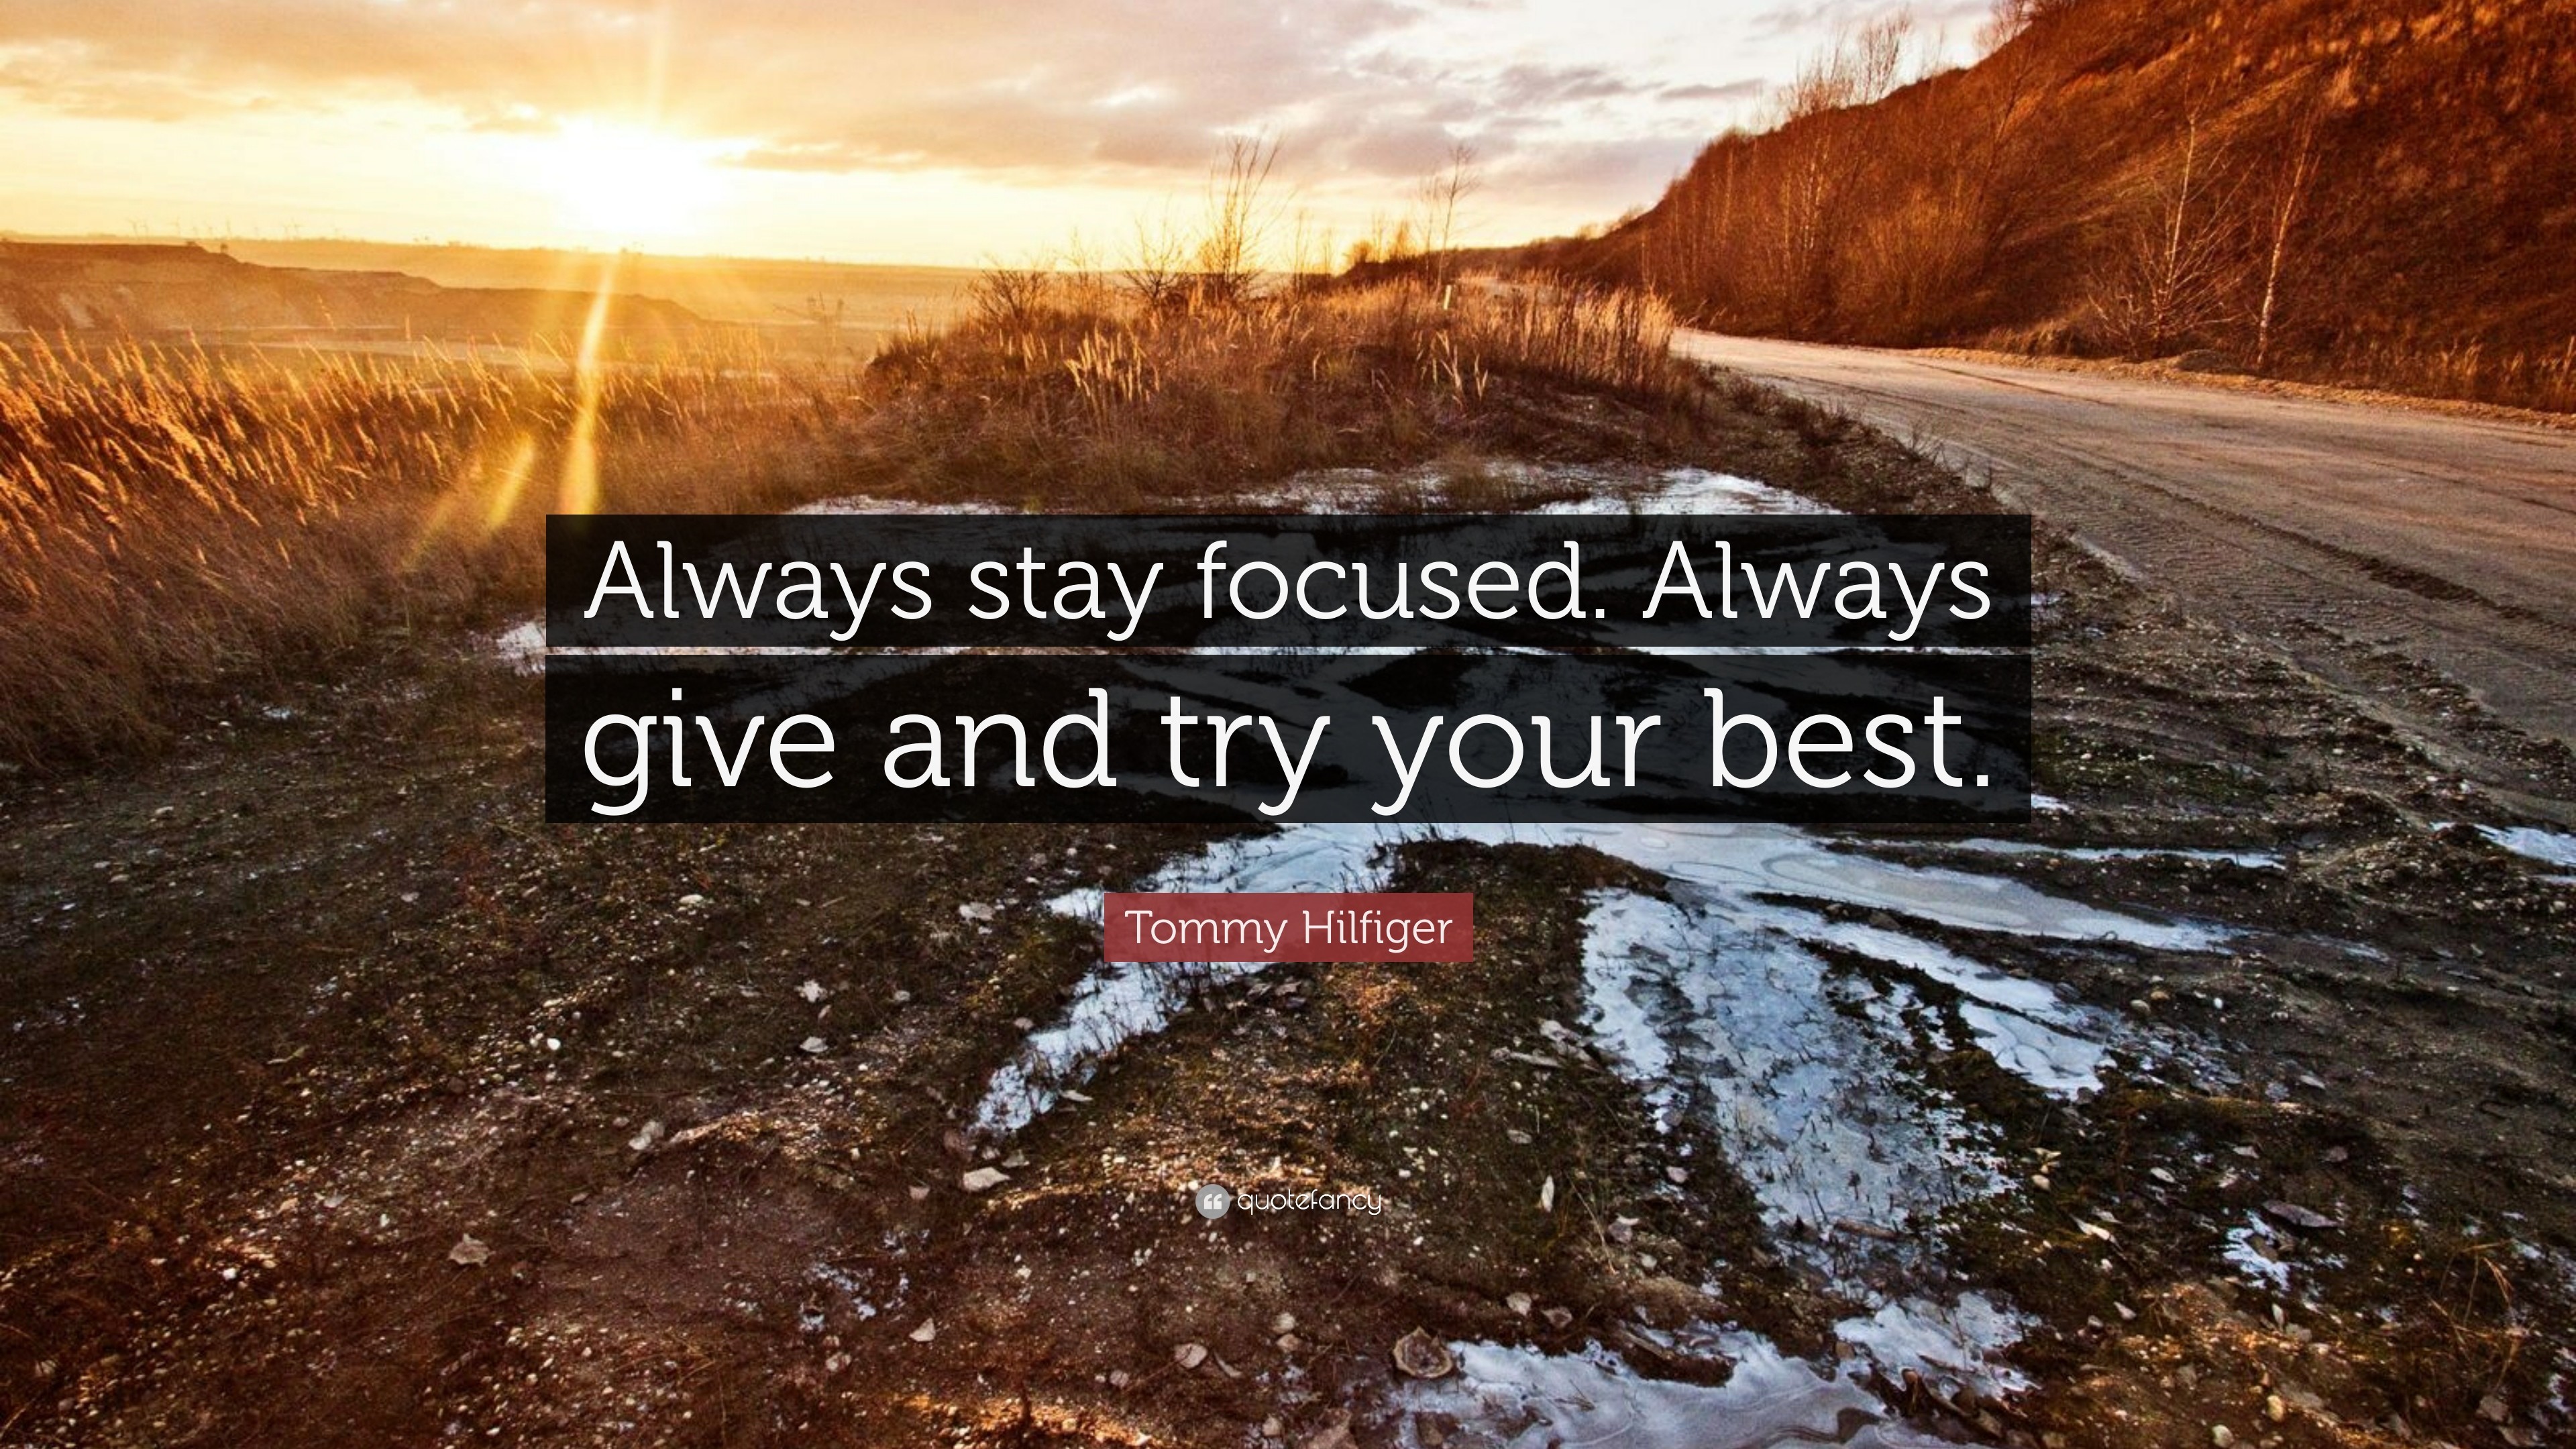 3840x2160 Tommy Hilfiger Quote: “Always stay focused. Always give and try your best.